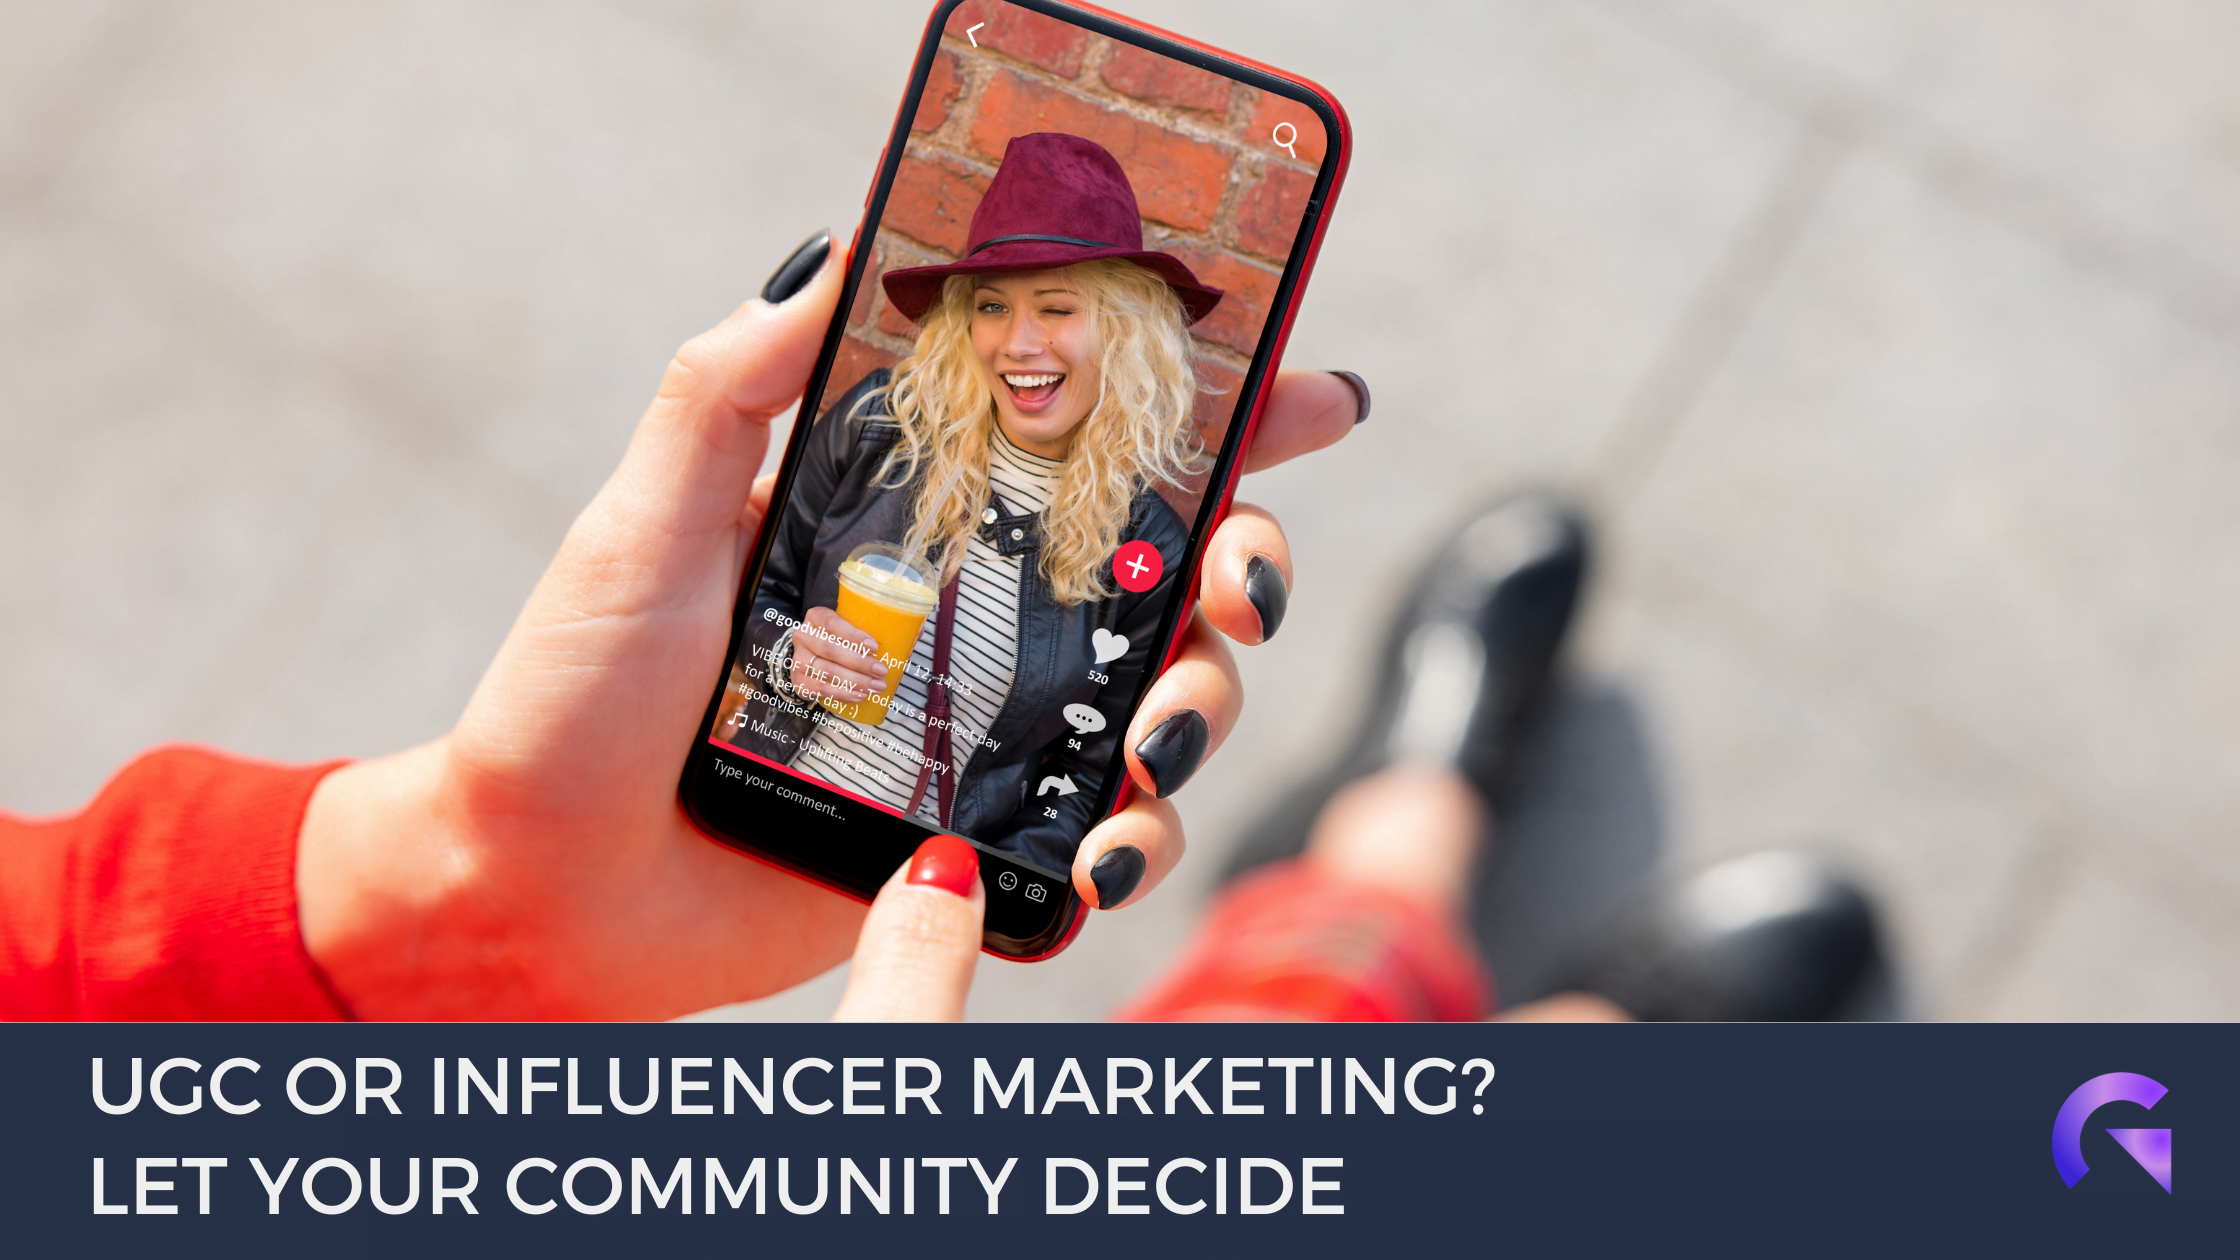 Image of a hand with nail polish, holding a phone with the image of a woman in a brown hat on social media, with the text :"UGC or Community Marketing: Let your community decide"